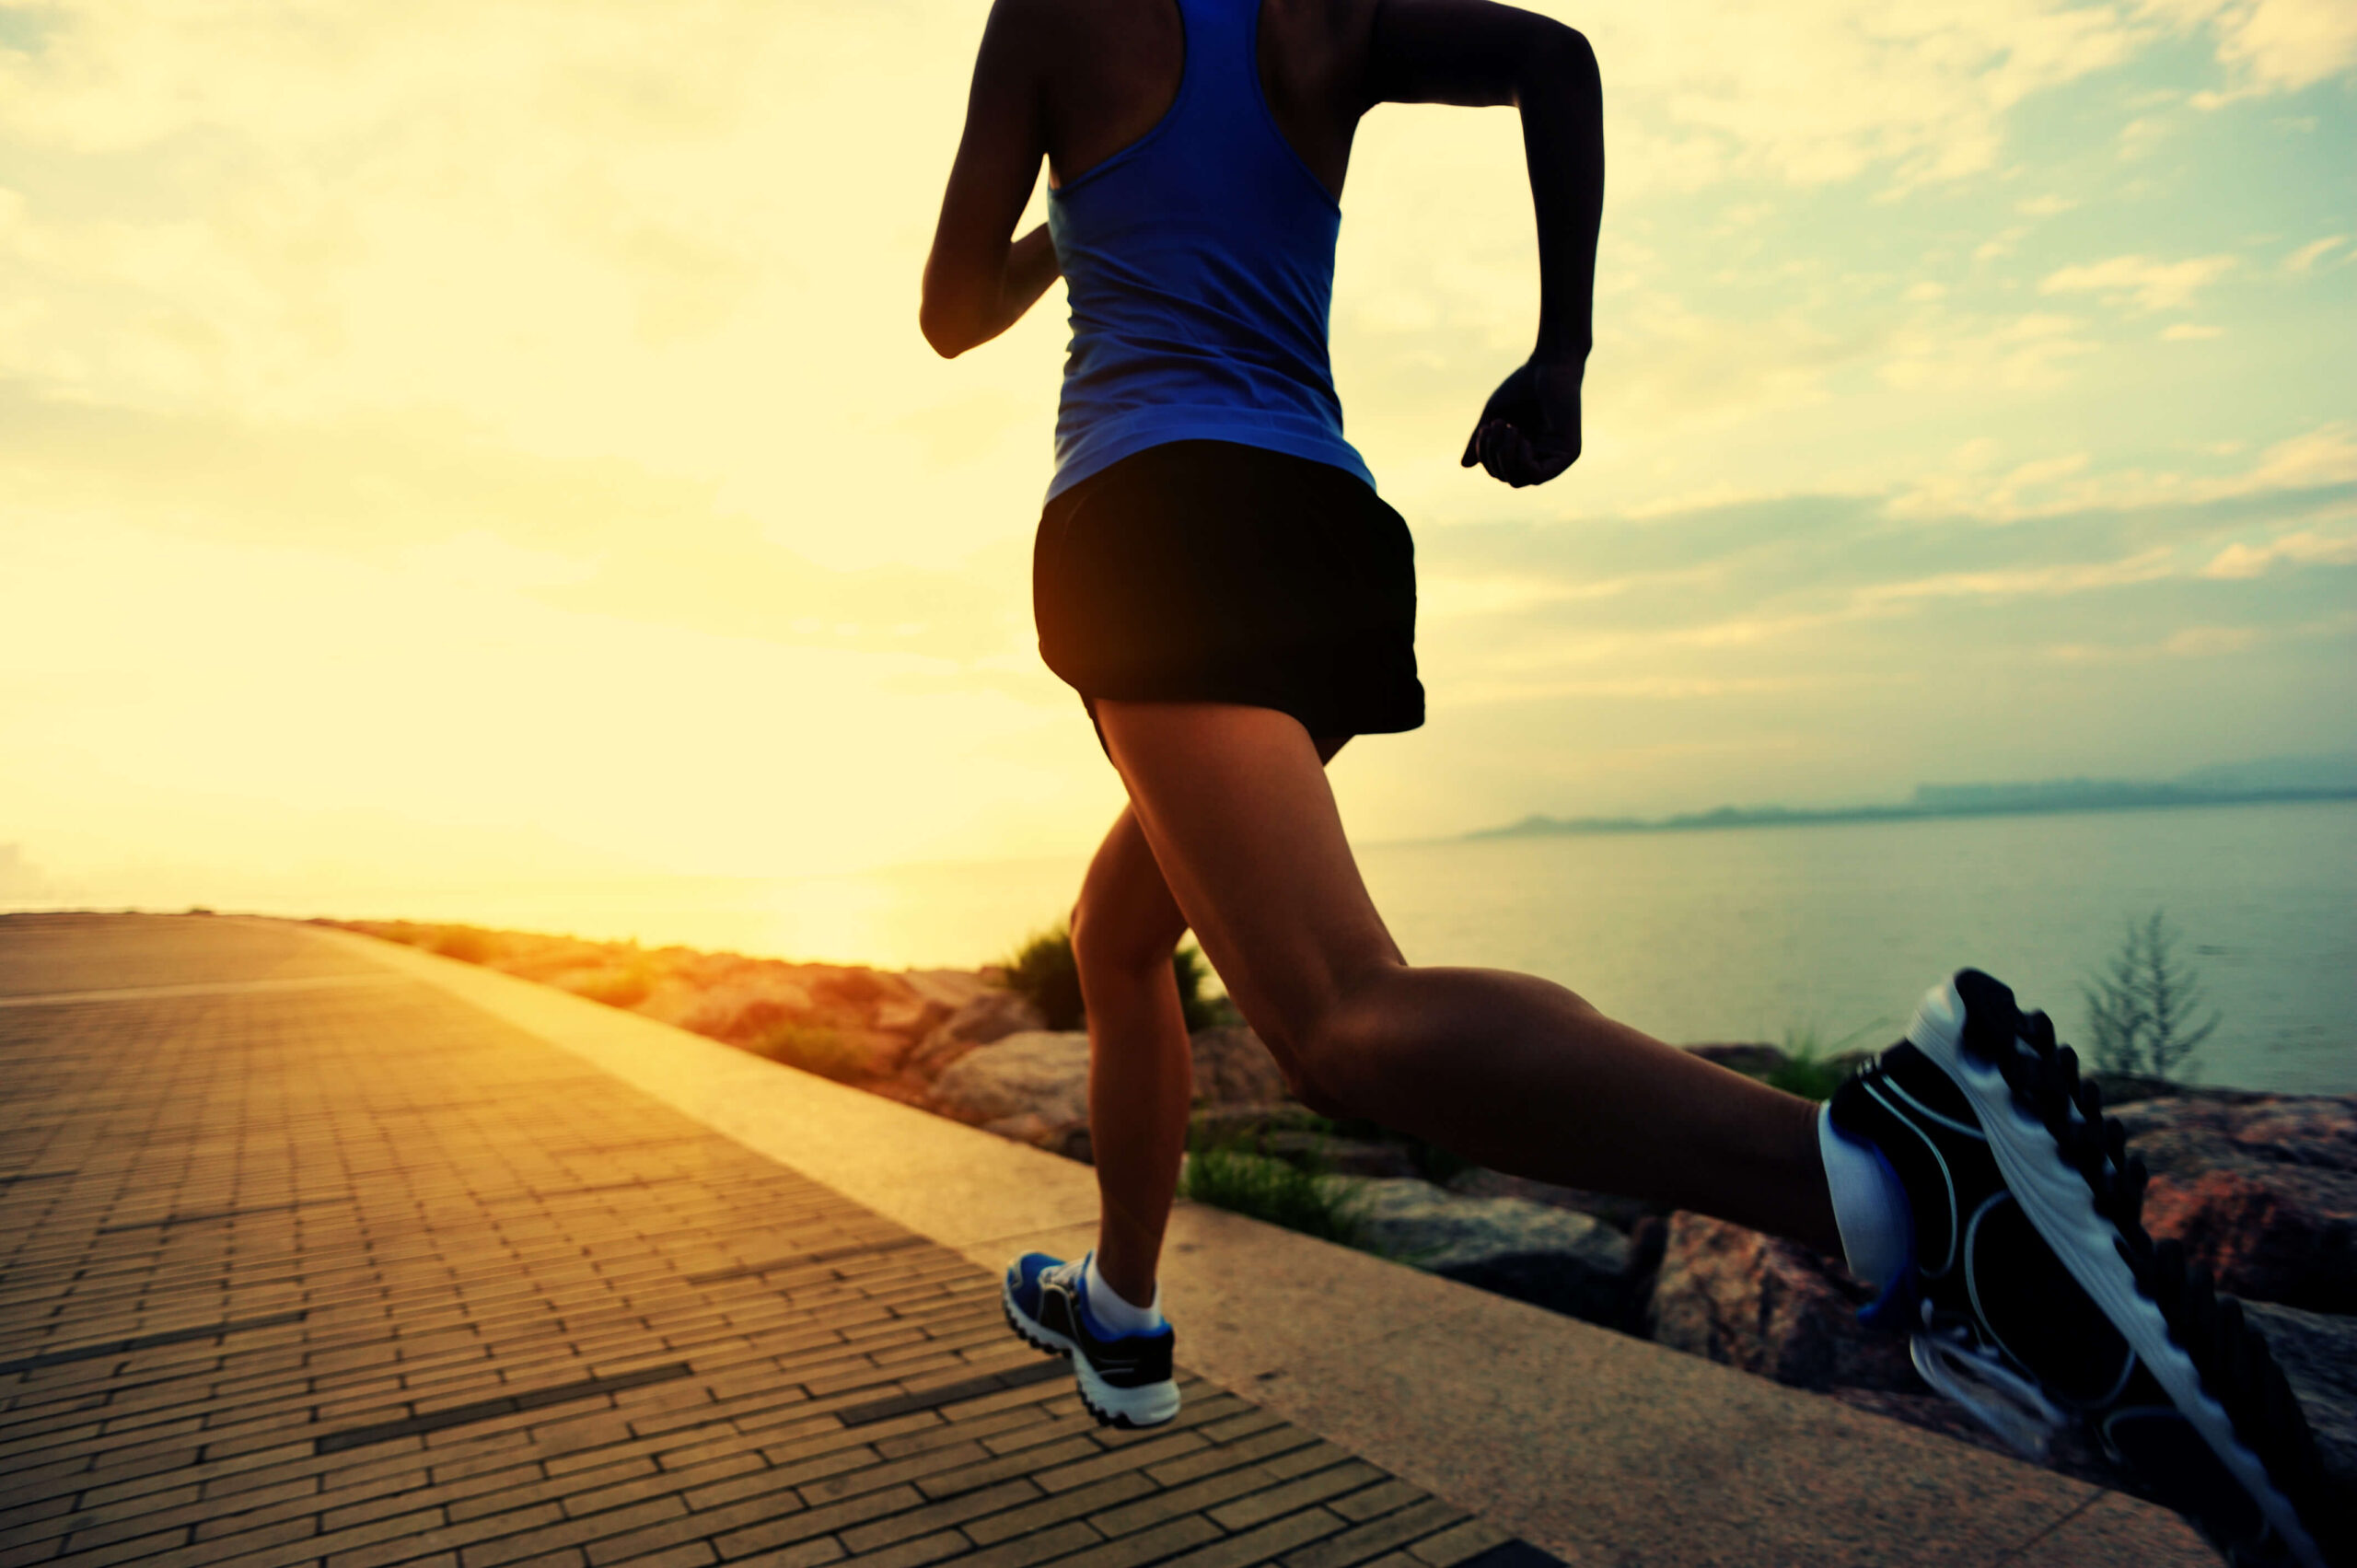 What to Be Careful of When Running or Jogging